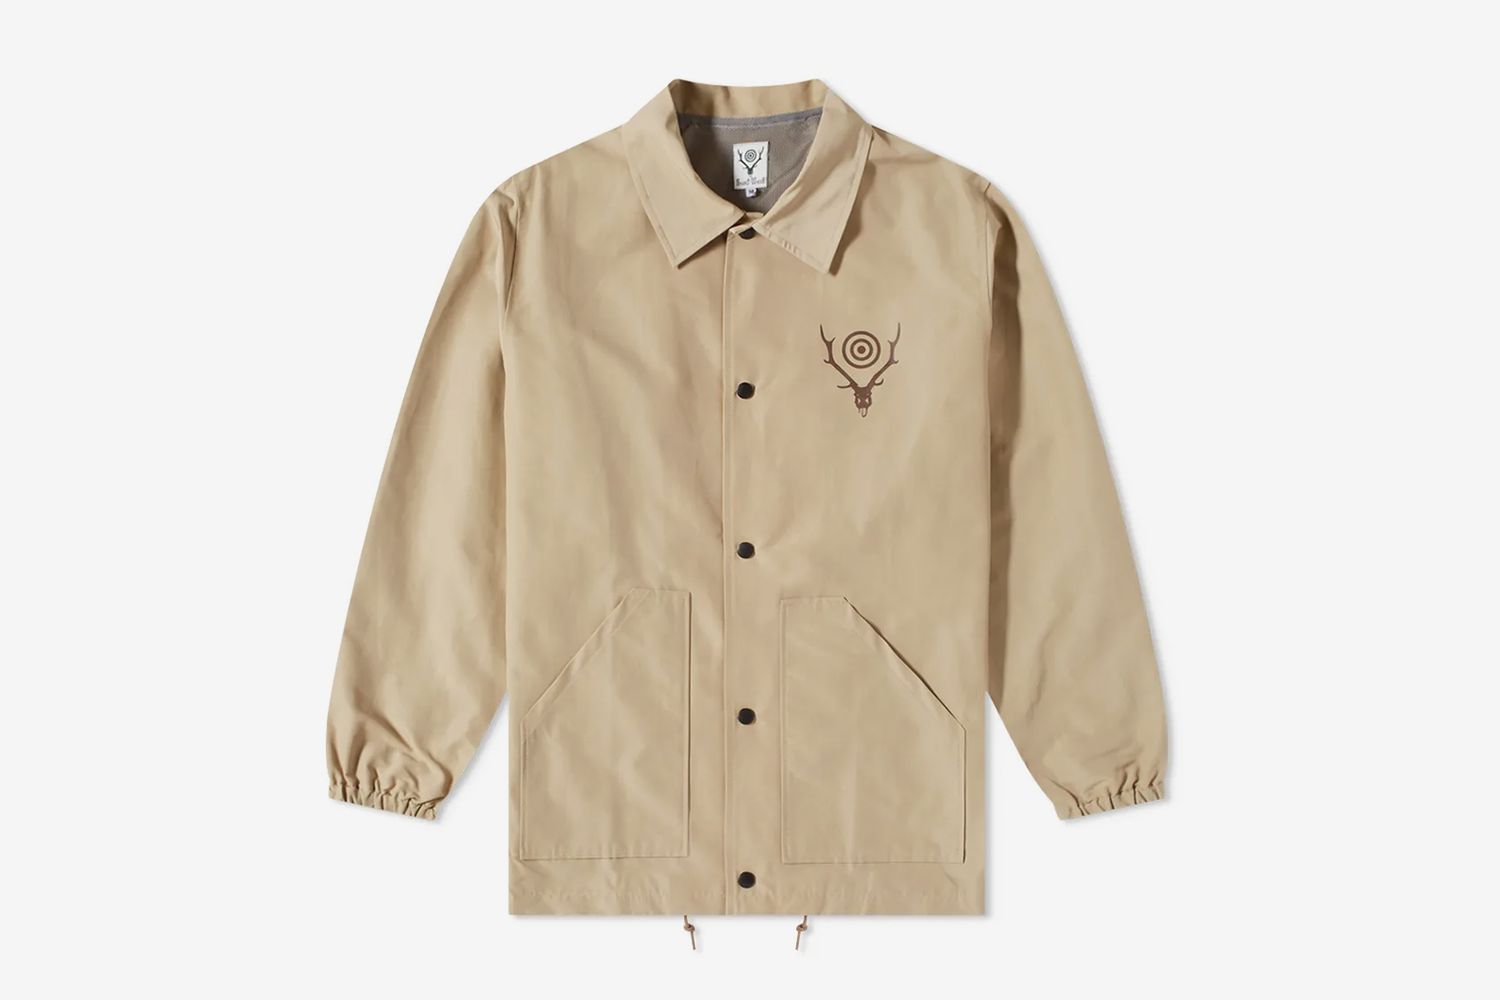 Transition into Fall tailwind skepta with these Coach Jackets